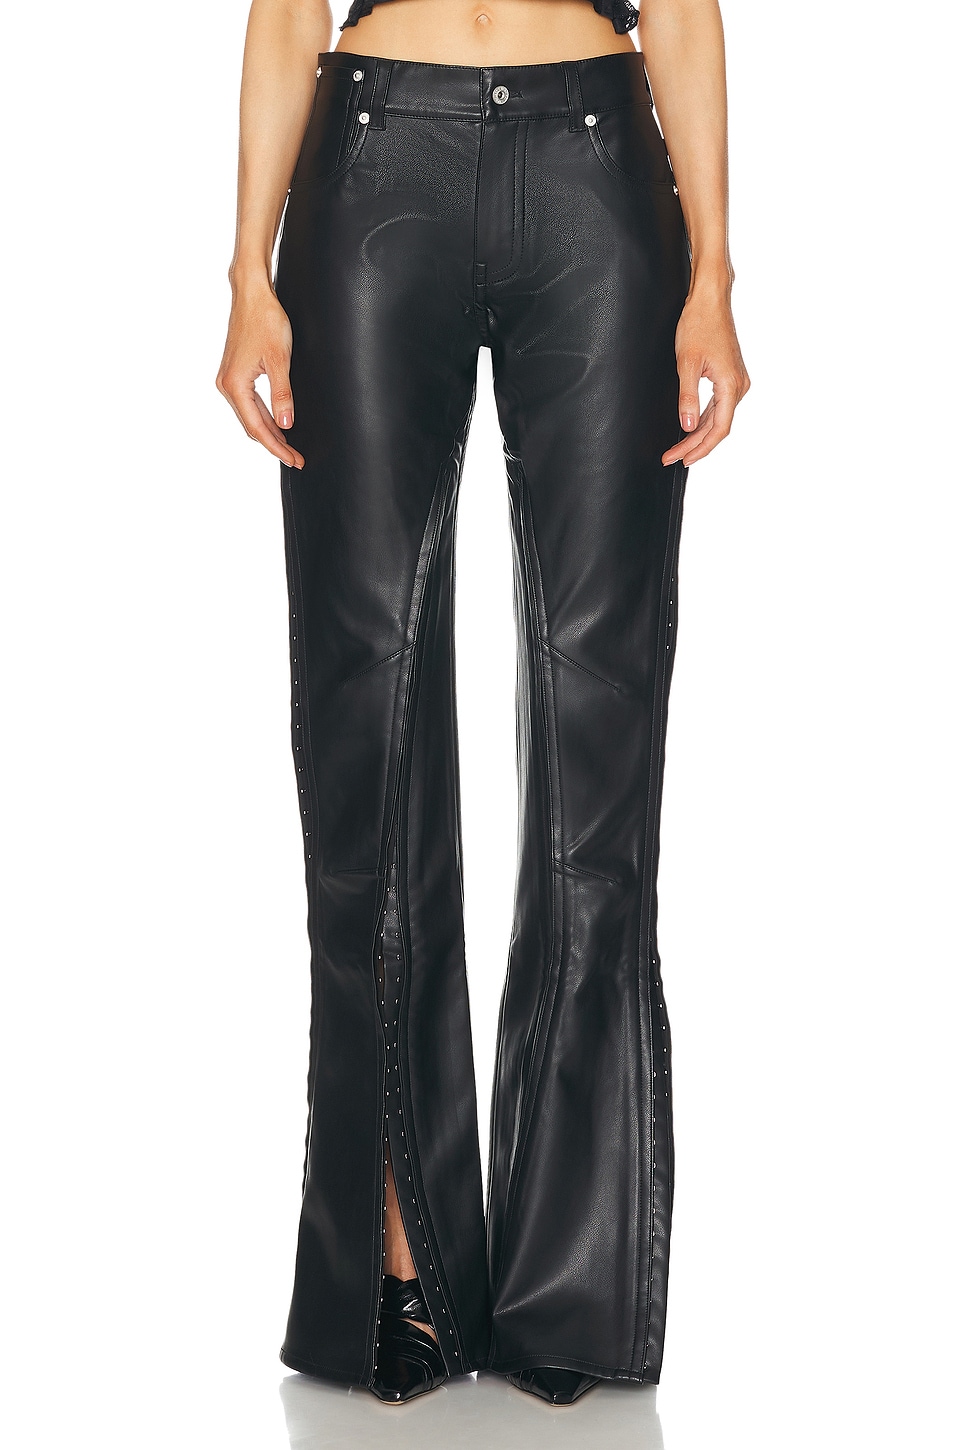 Image 1 of Y/Project Hook And Eye Slim Leather Pant in Black